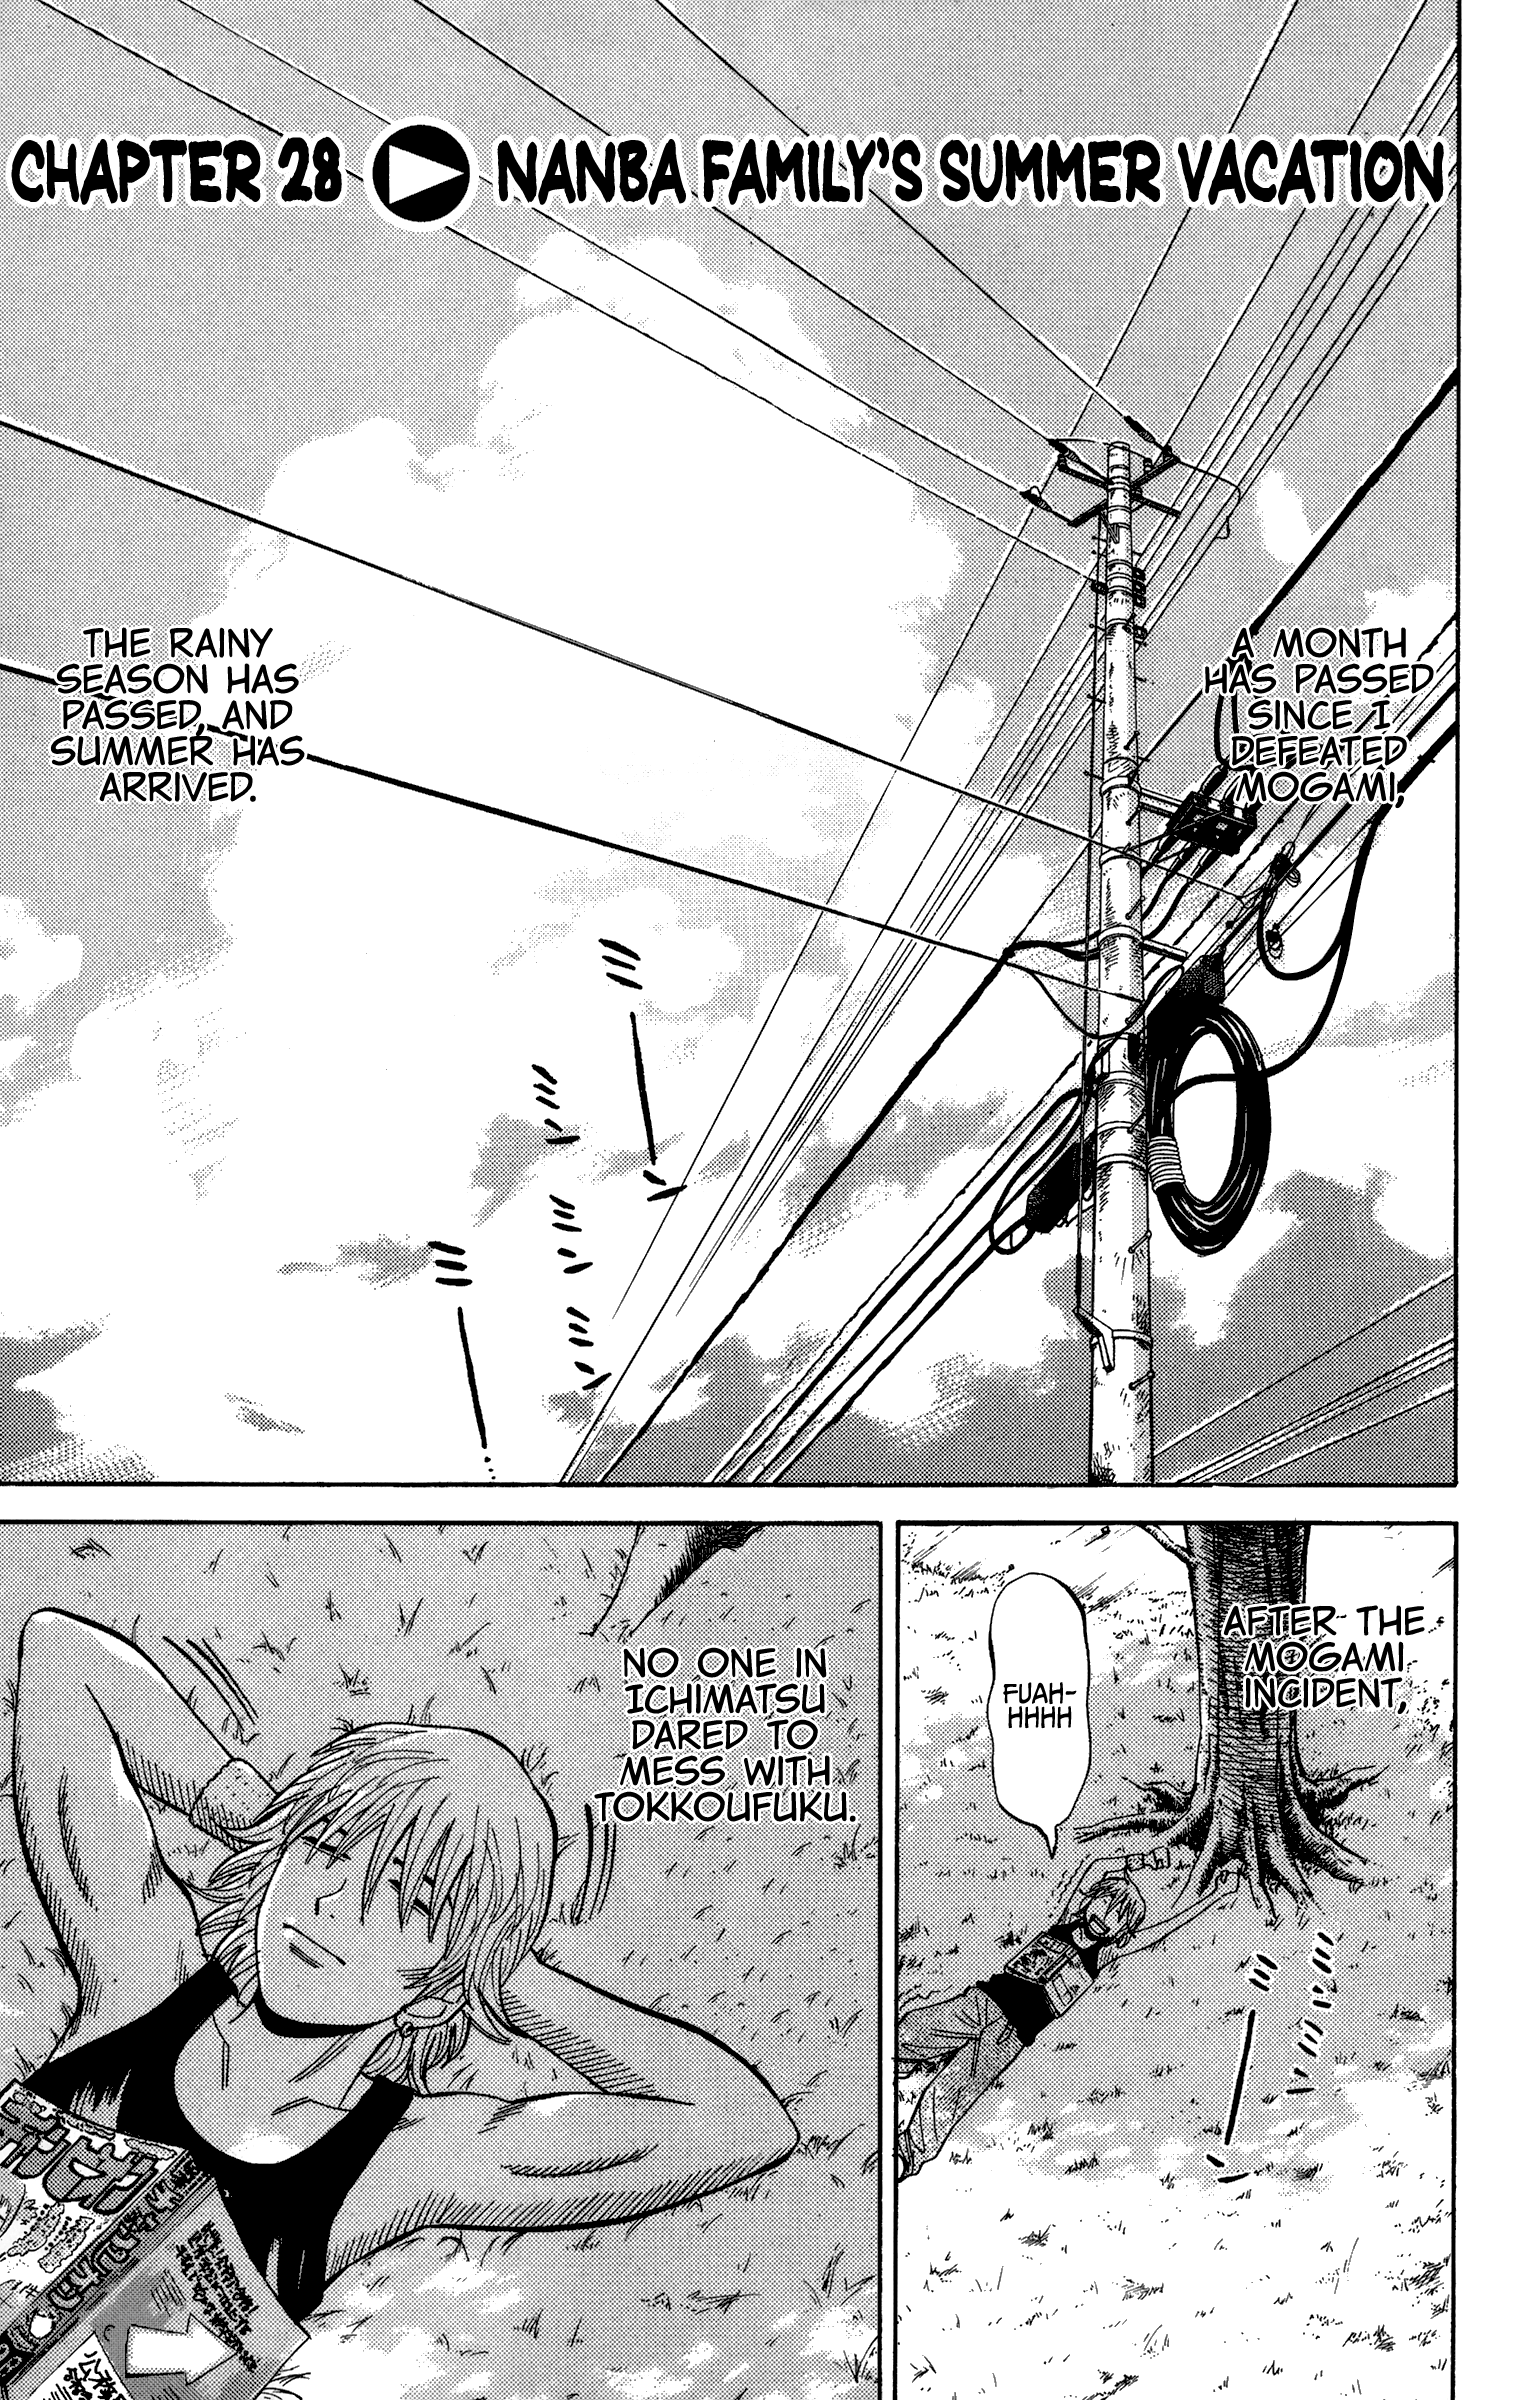 In The Summer Chapter 28 Page 1 :: Nanba MG5 :: Chapter 28 :: Death Toll Reader